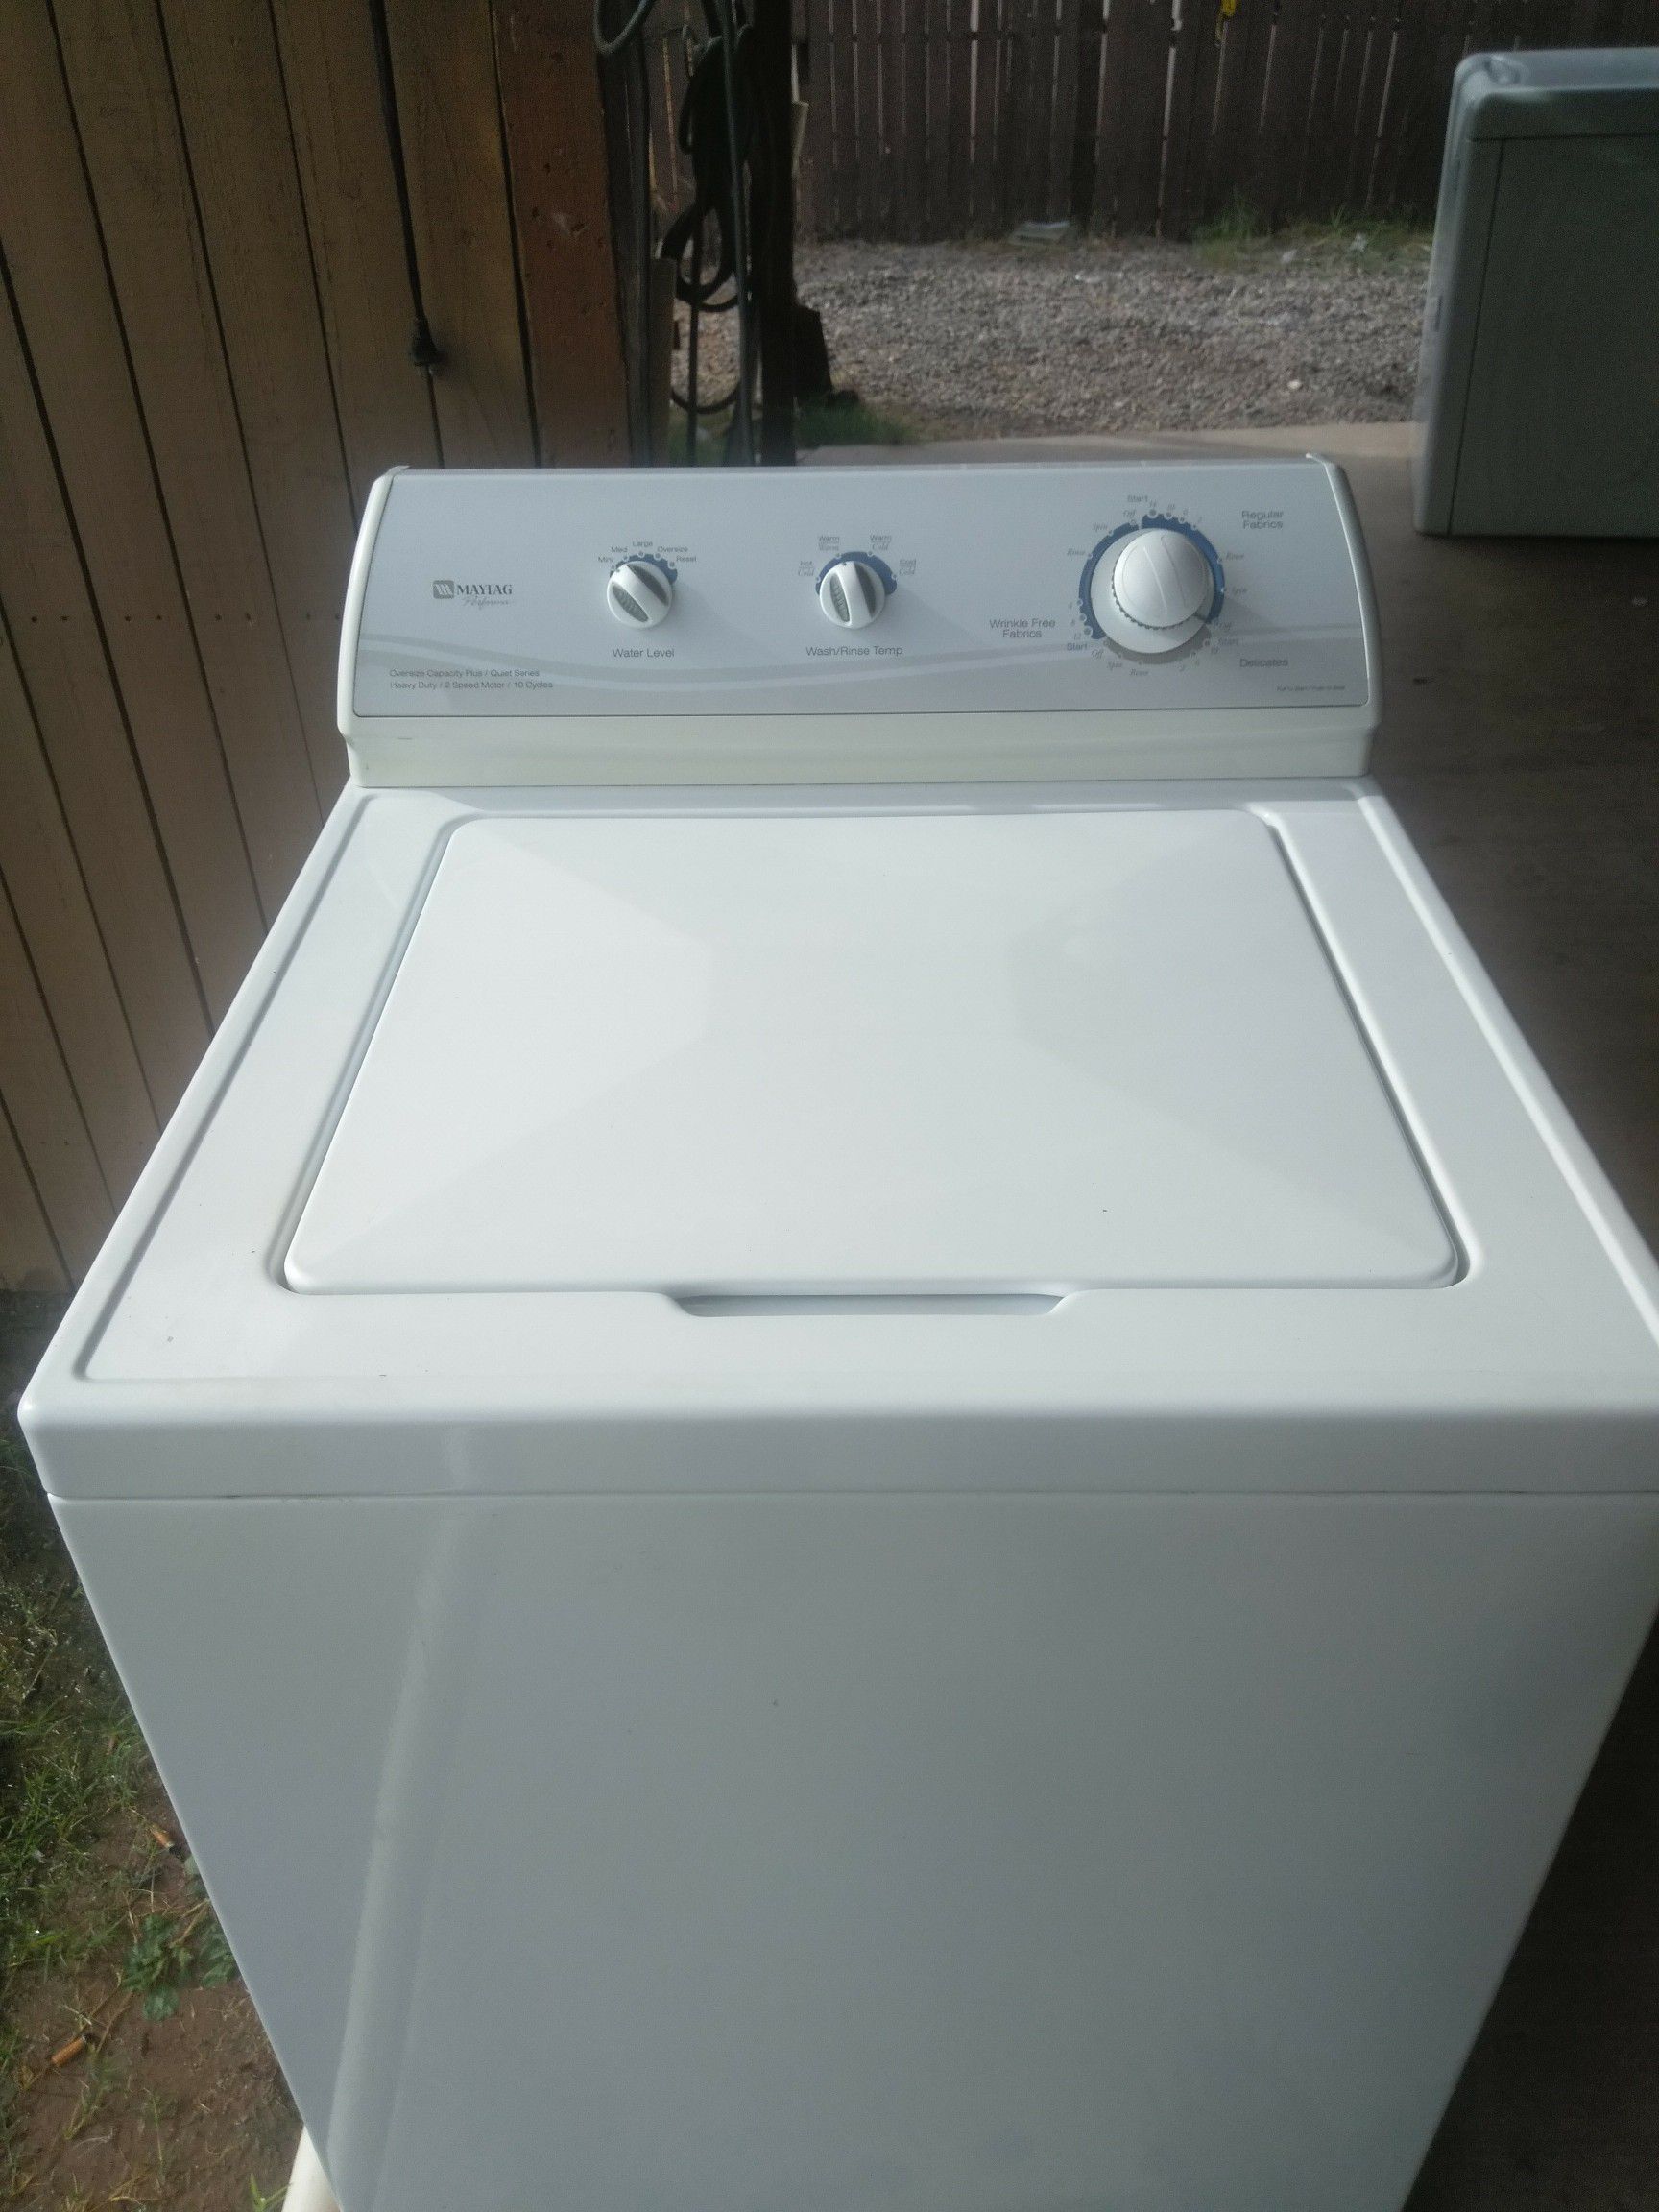 Washer Maytag performa super King size capacity plus with warranty 3 months warranty delivery available$180